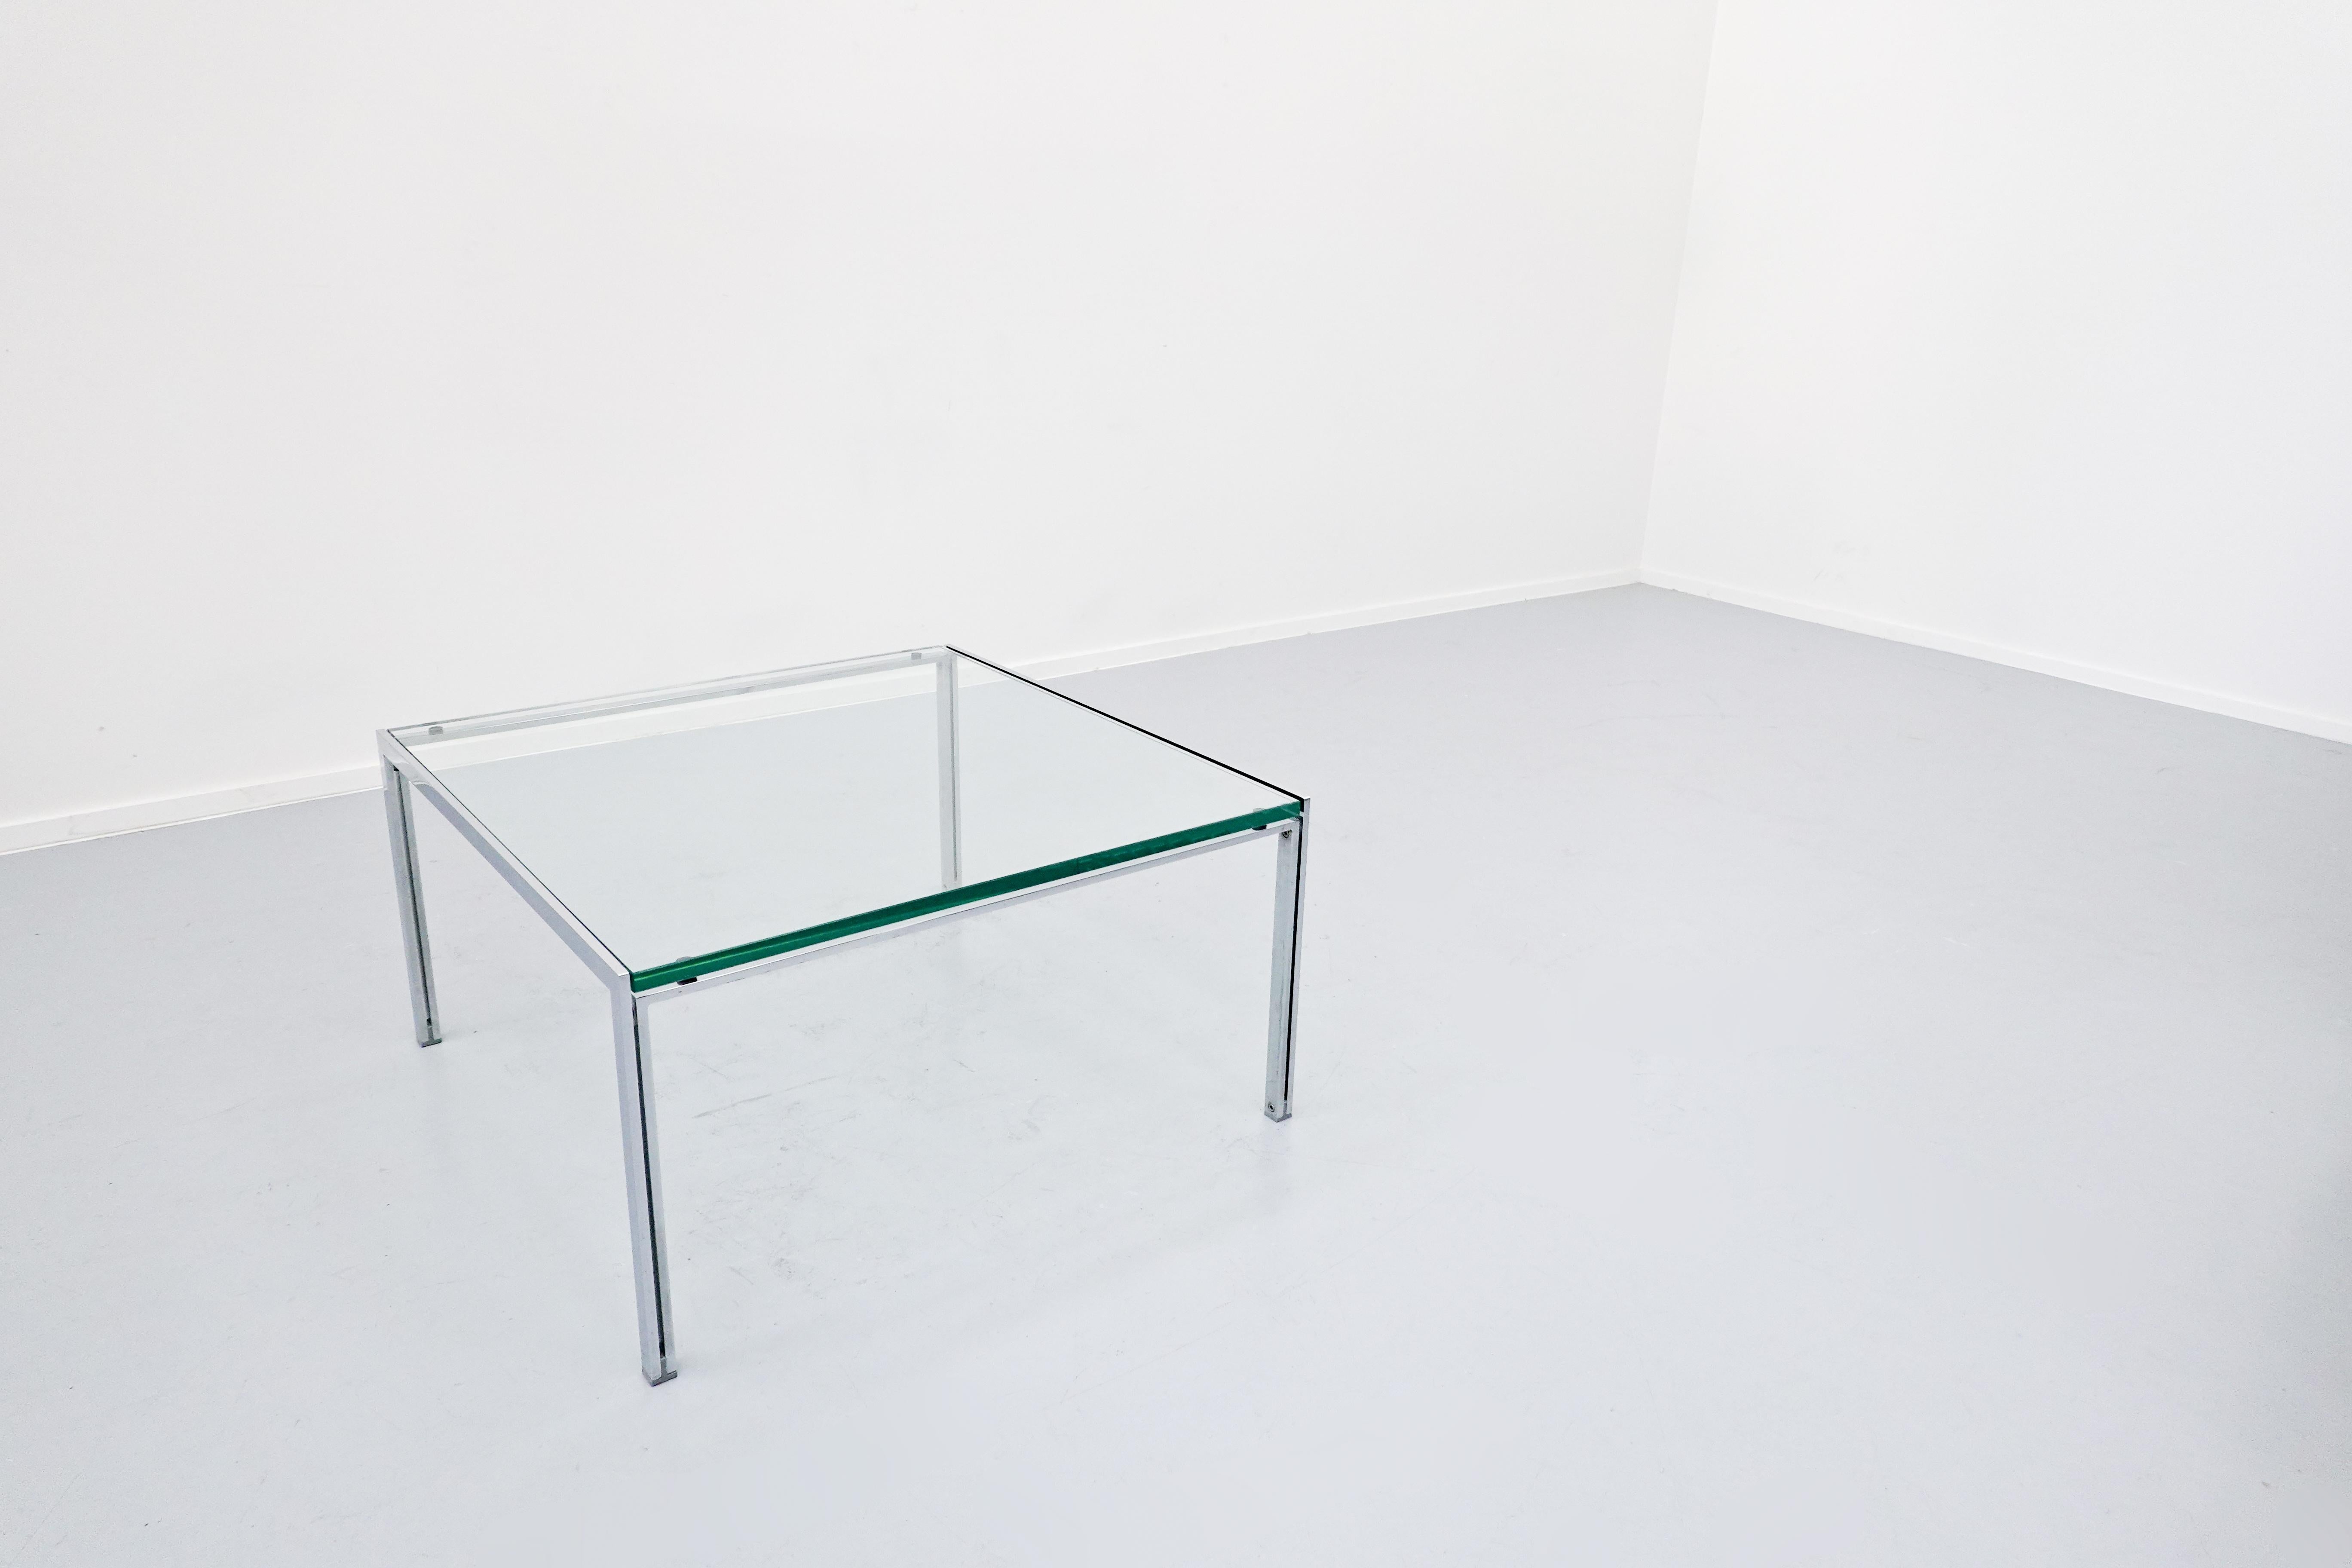 Mid-20th Century Mid-Century Modern Coffee Table, Chrome and Glass, 1960s For Sale